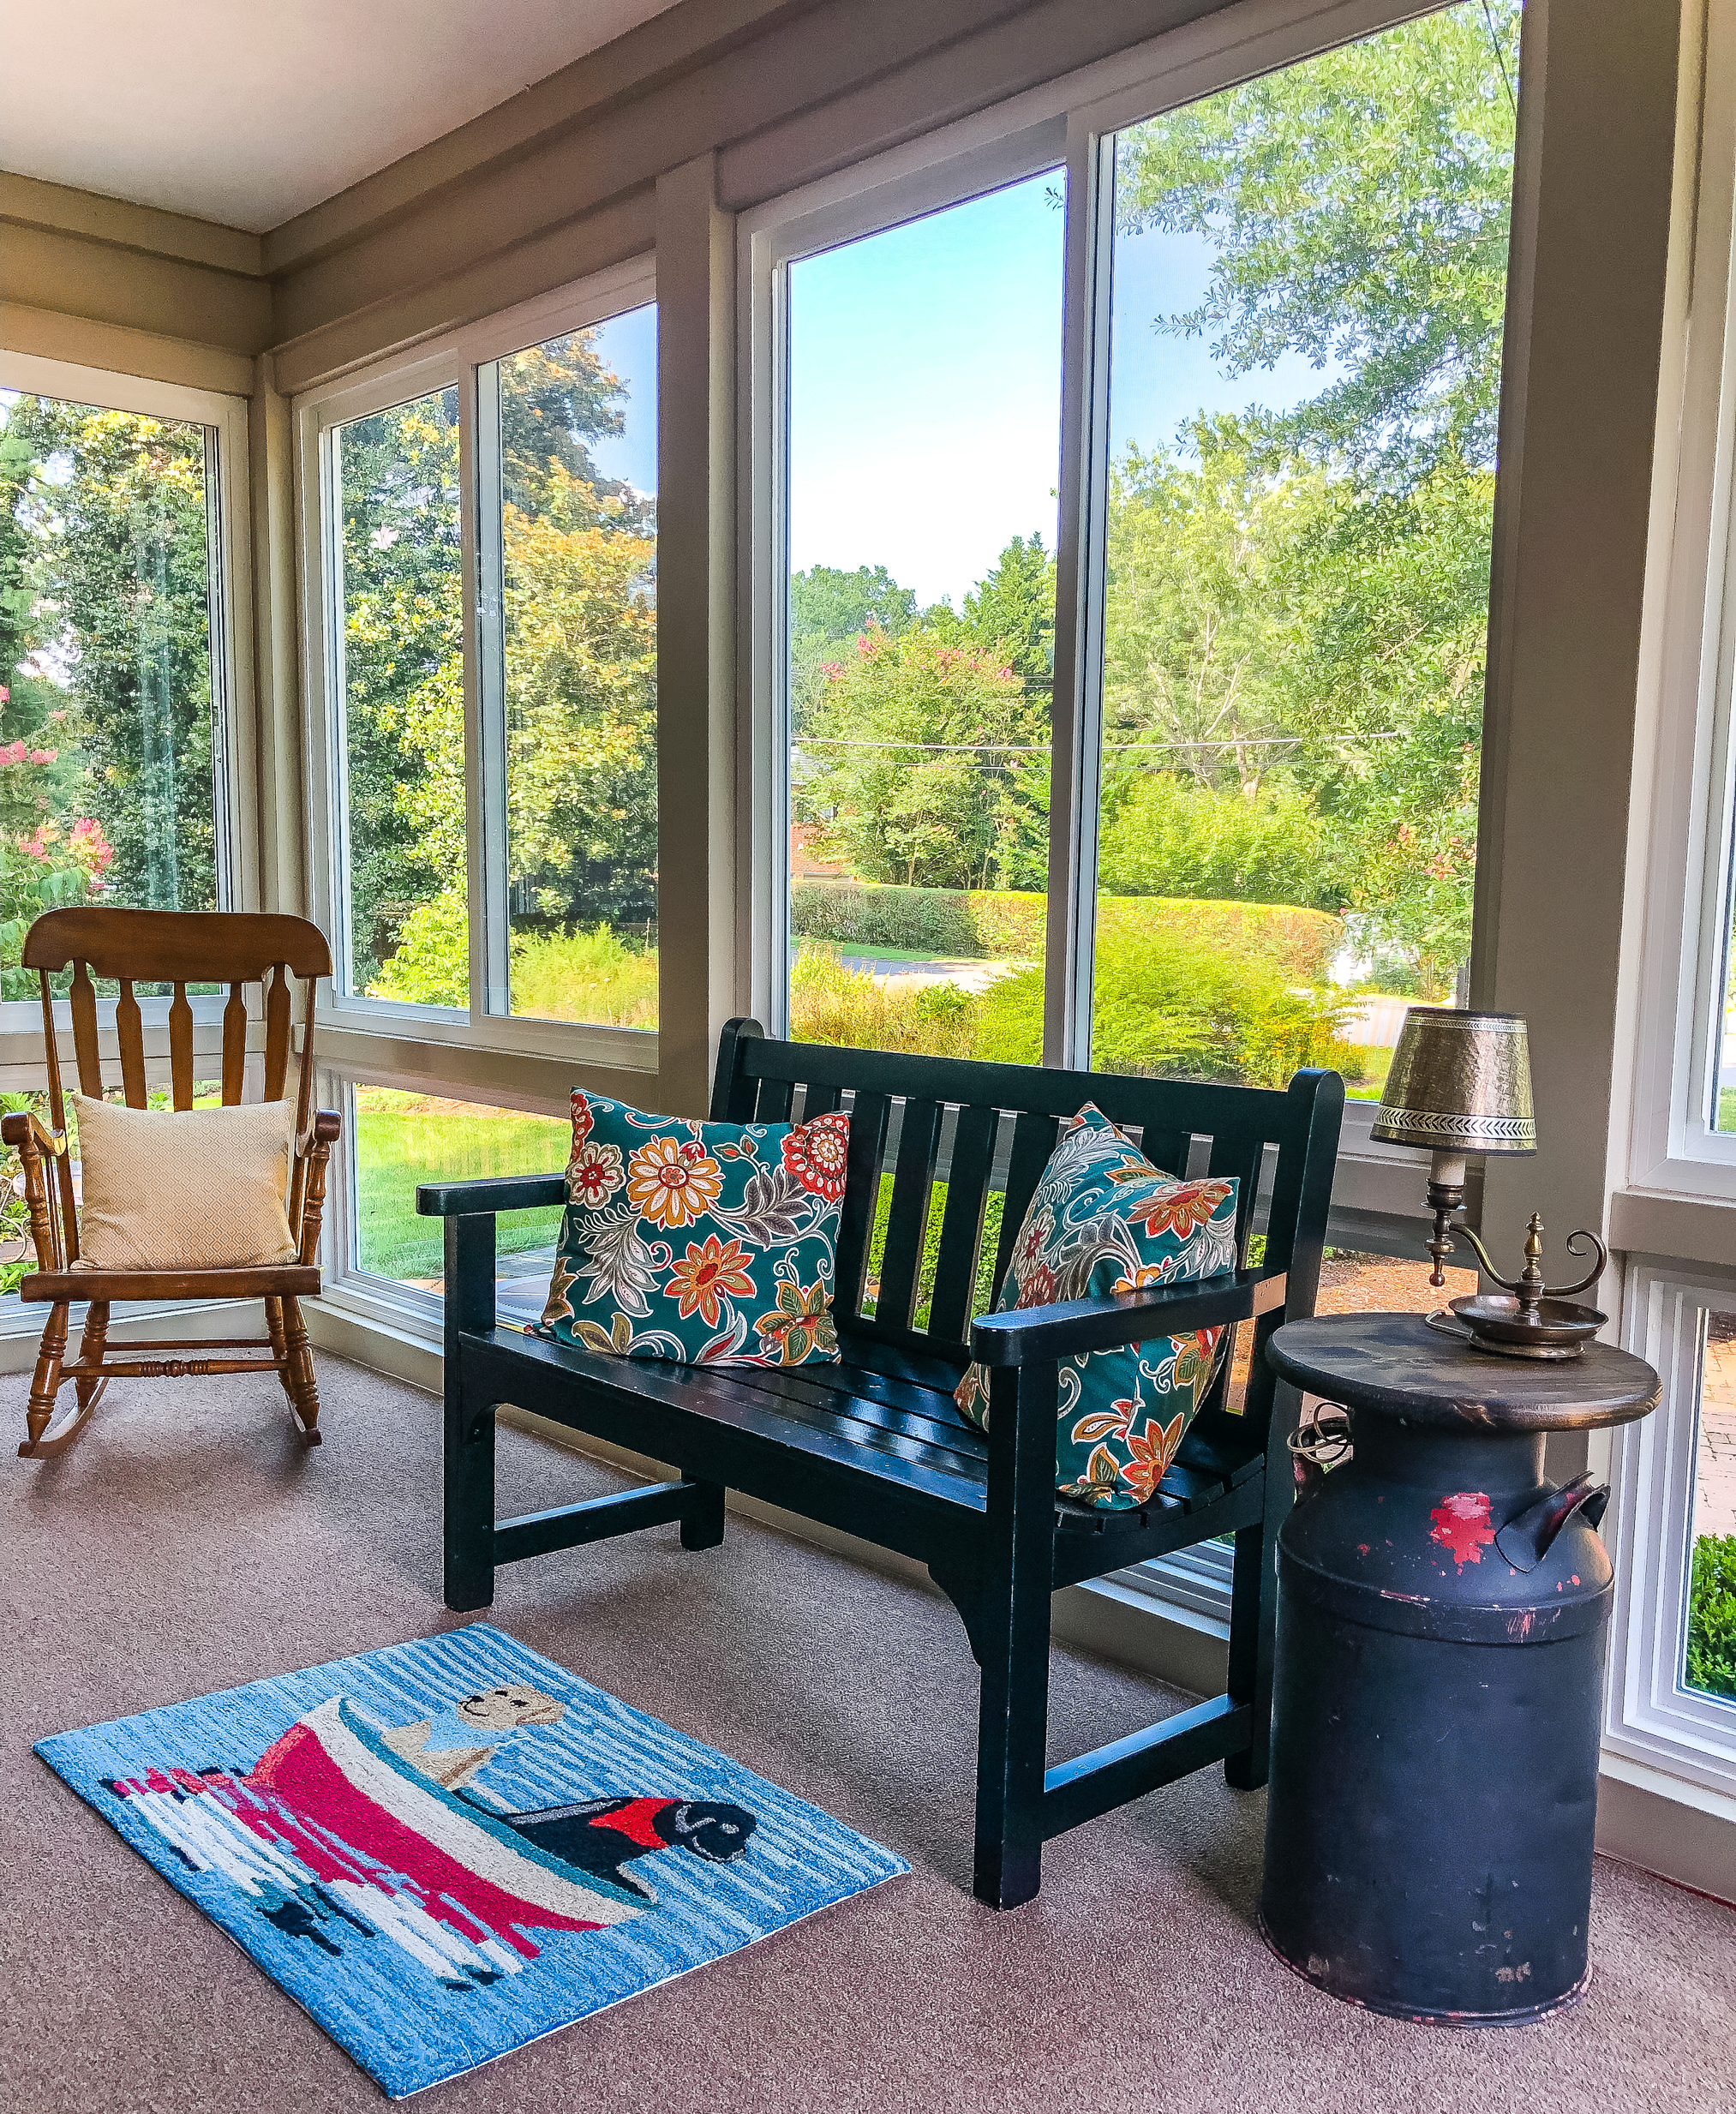 Interior pictures of a screened porch converted to a sunroom.